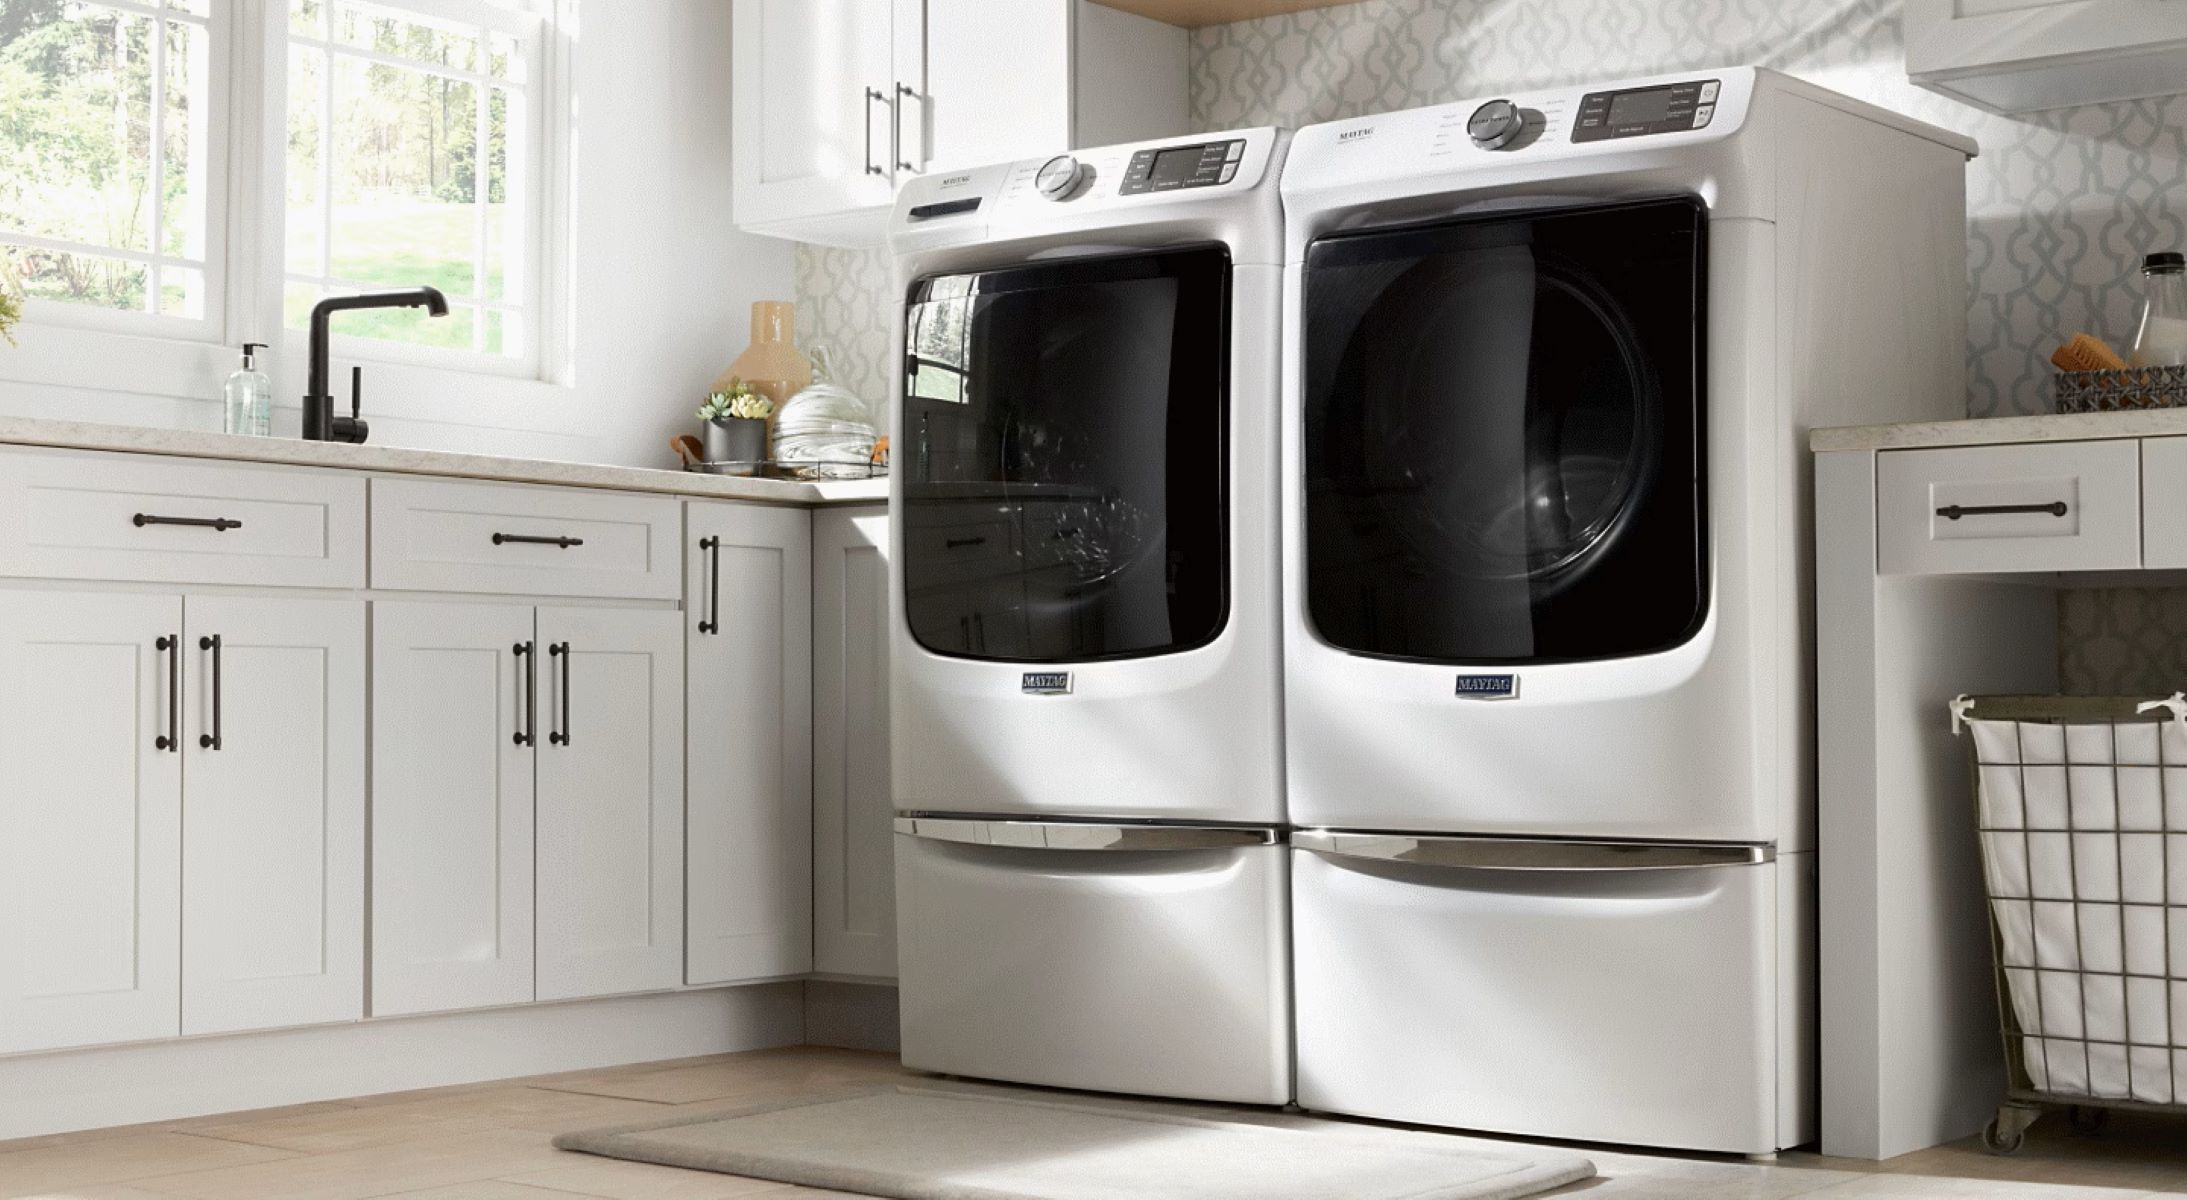 How To Fix The Error Code F01 For Maytag Dryer